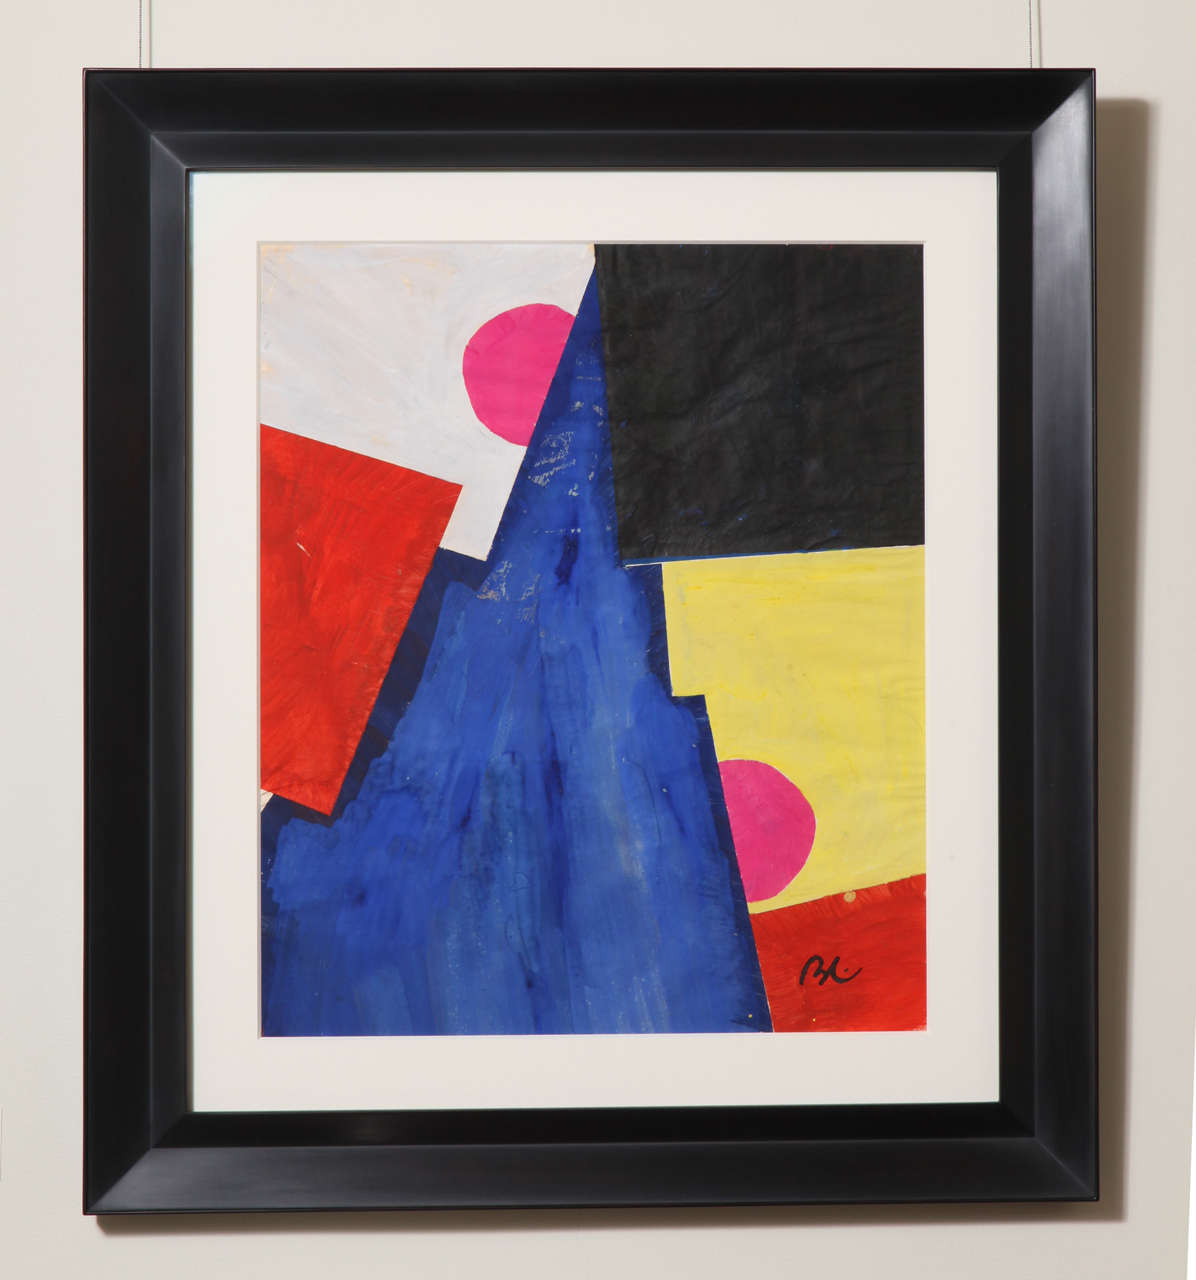 Image: 18 ¼” wide; 21 ½” high
Frame: 27” wide; 30 5/8” high

Custom framed with mat and museum glass.

Multicolored abstract geometric composition with blue triangle, squares and circles. 

Signed BL on lower right.